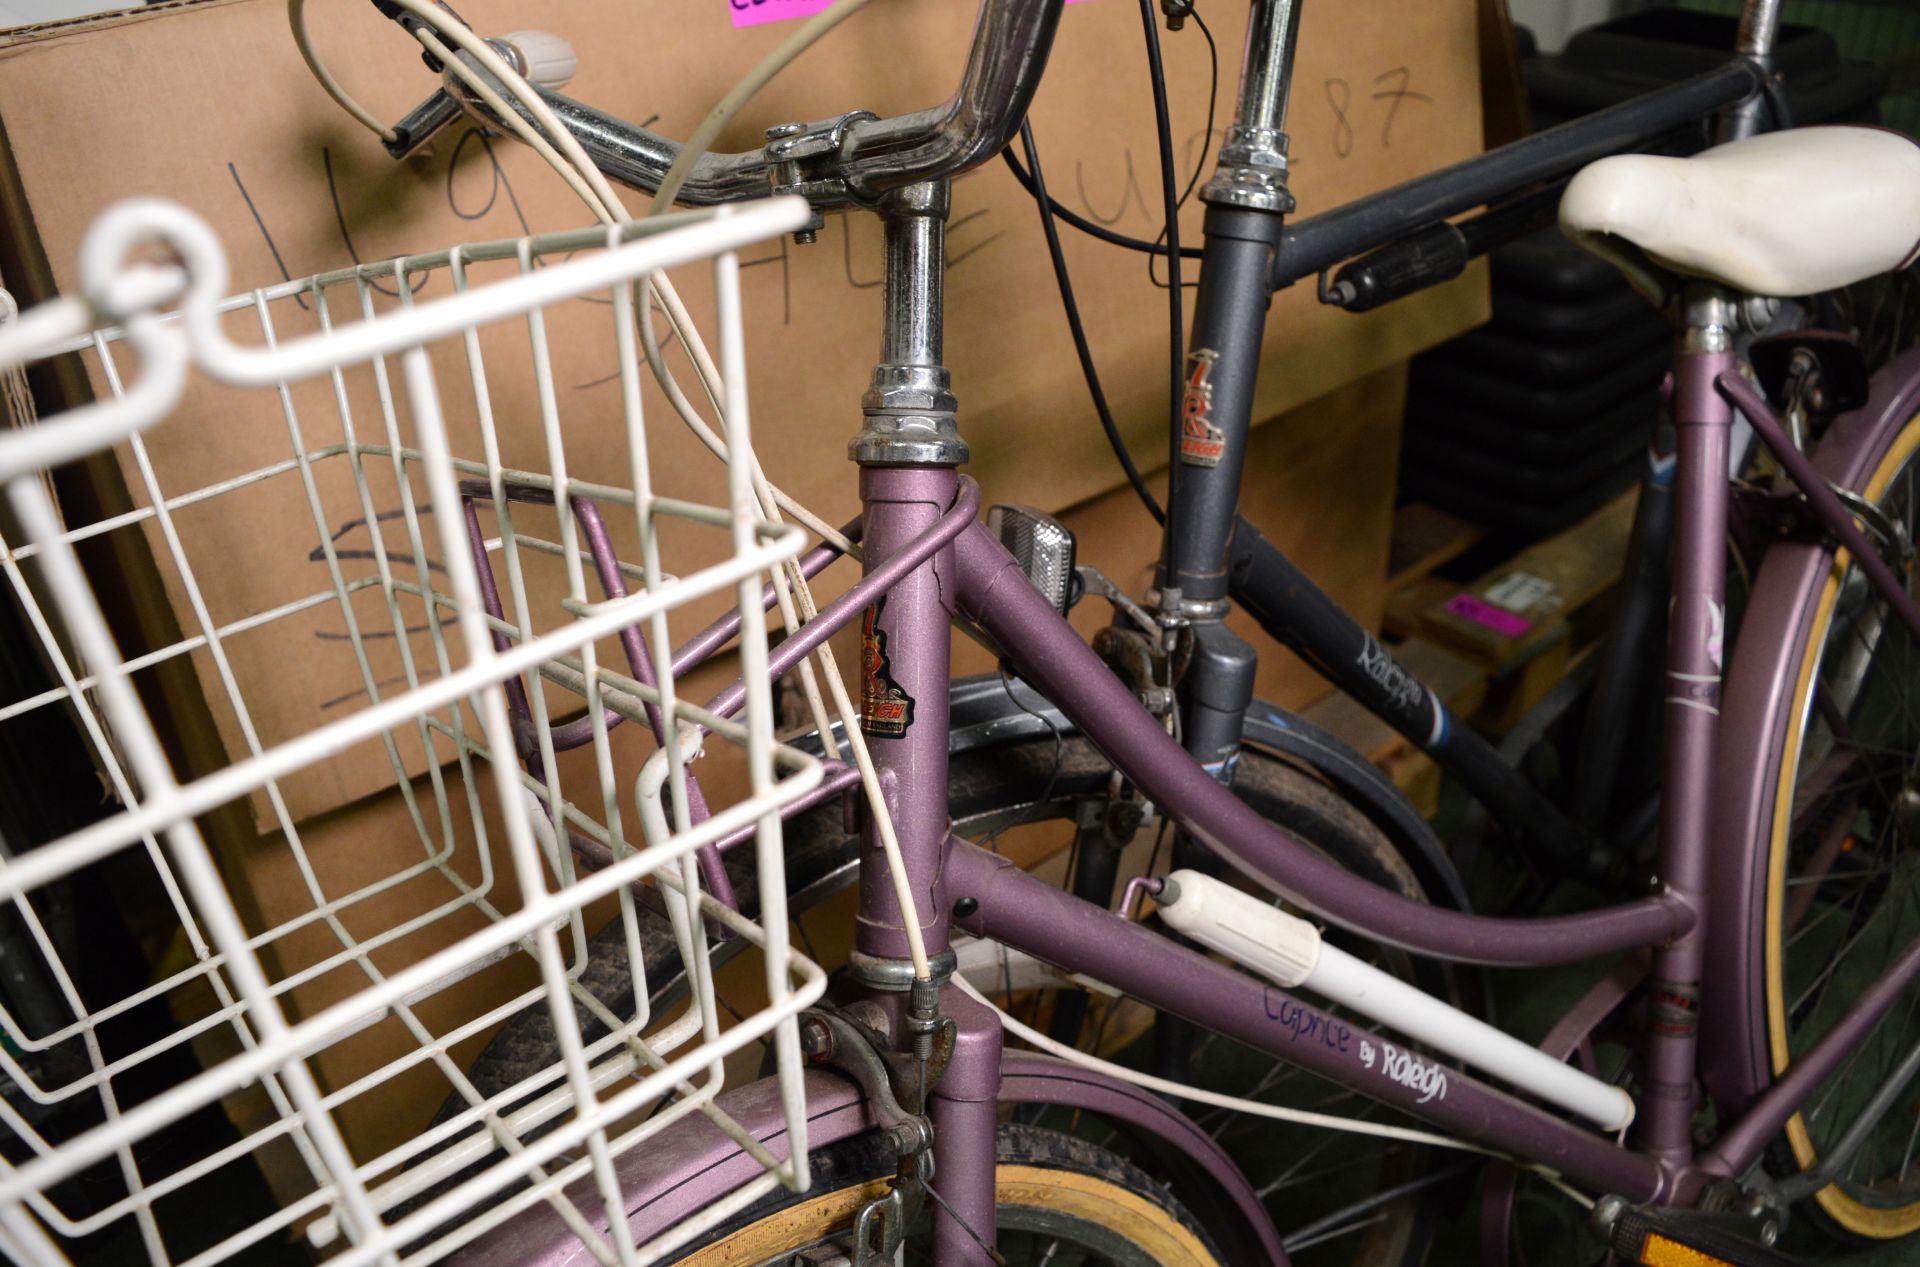 Raleigh 'His & Her's' Bicycles with 3 Speed Gearboxes. - Image 2 of 2